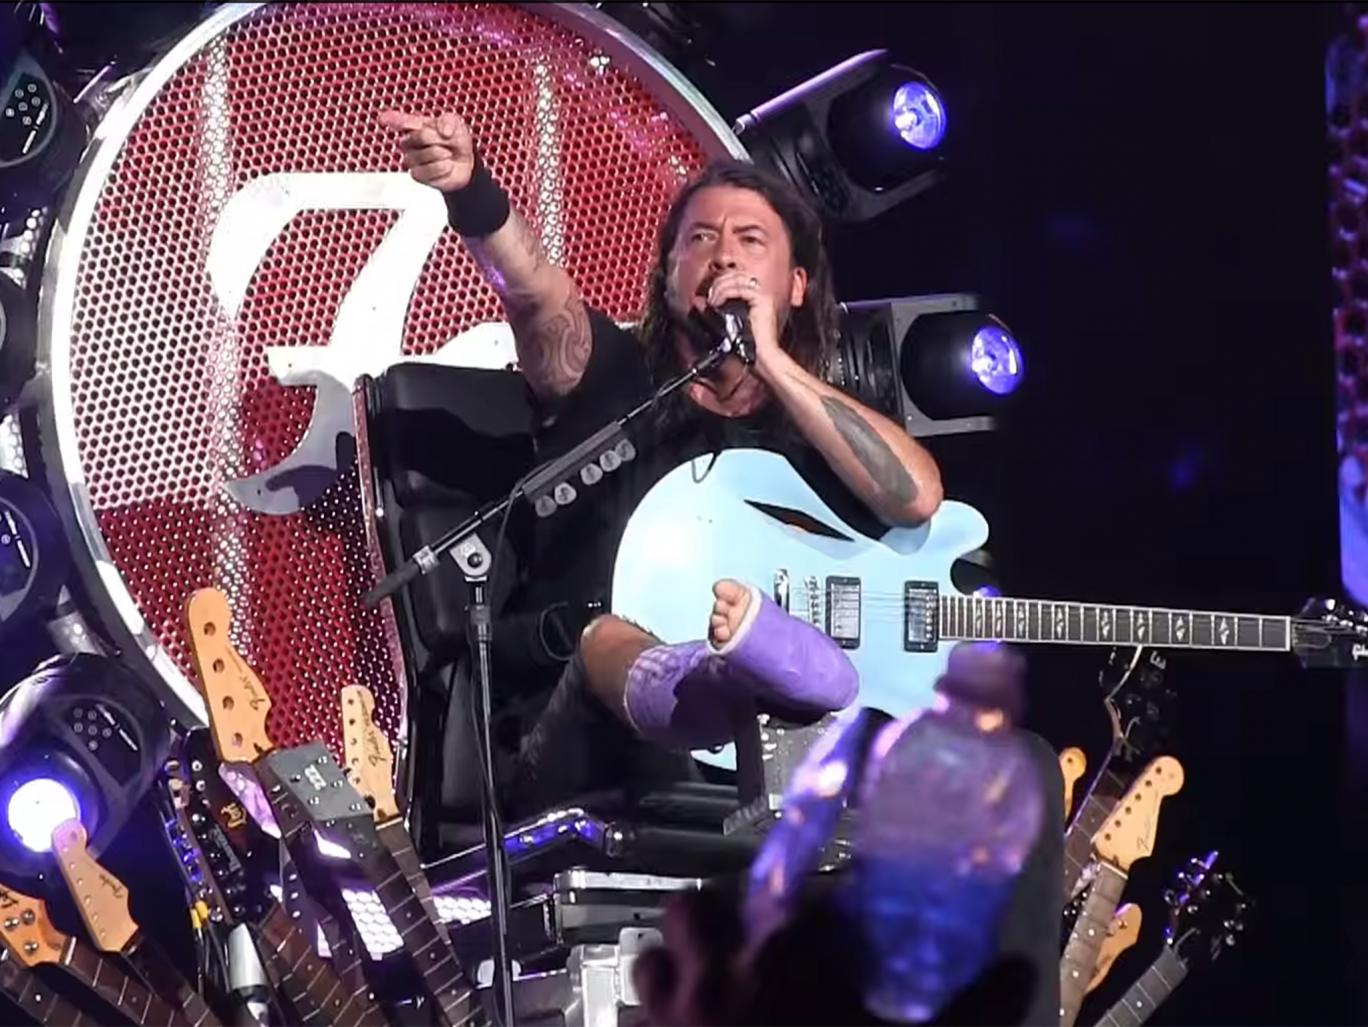 You must know what happened to Dave Grohl in 2015. Dave hurt his leg in Sweden but simply said "I think i broke my leg" and chatted with fans while his leg was being put in shape. Needless to say he continued to play and sing cause he hurt his leg not his hands as he said himself.